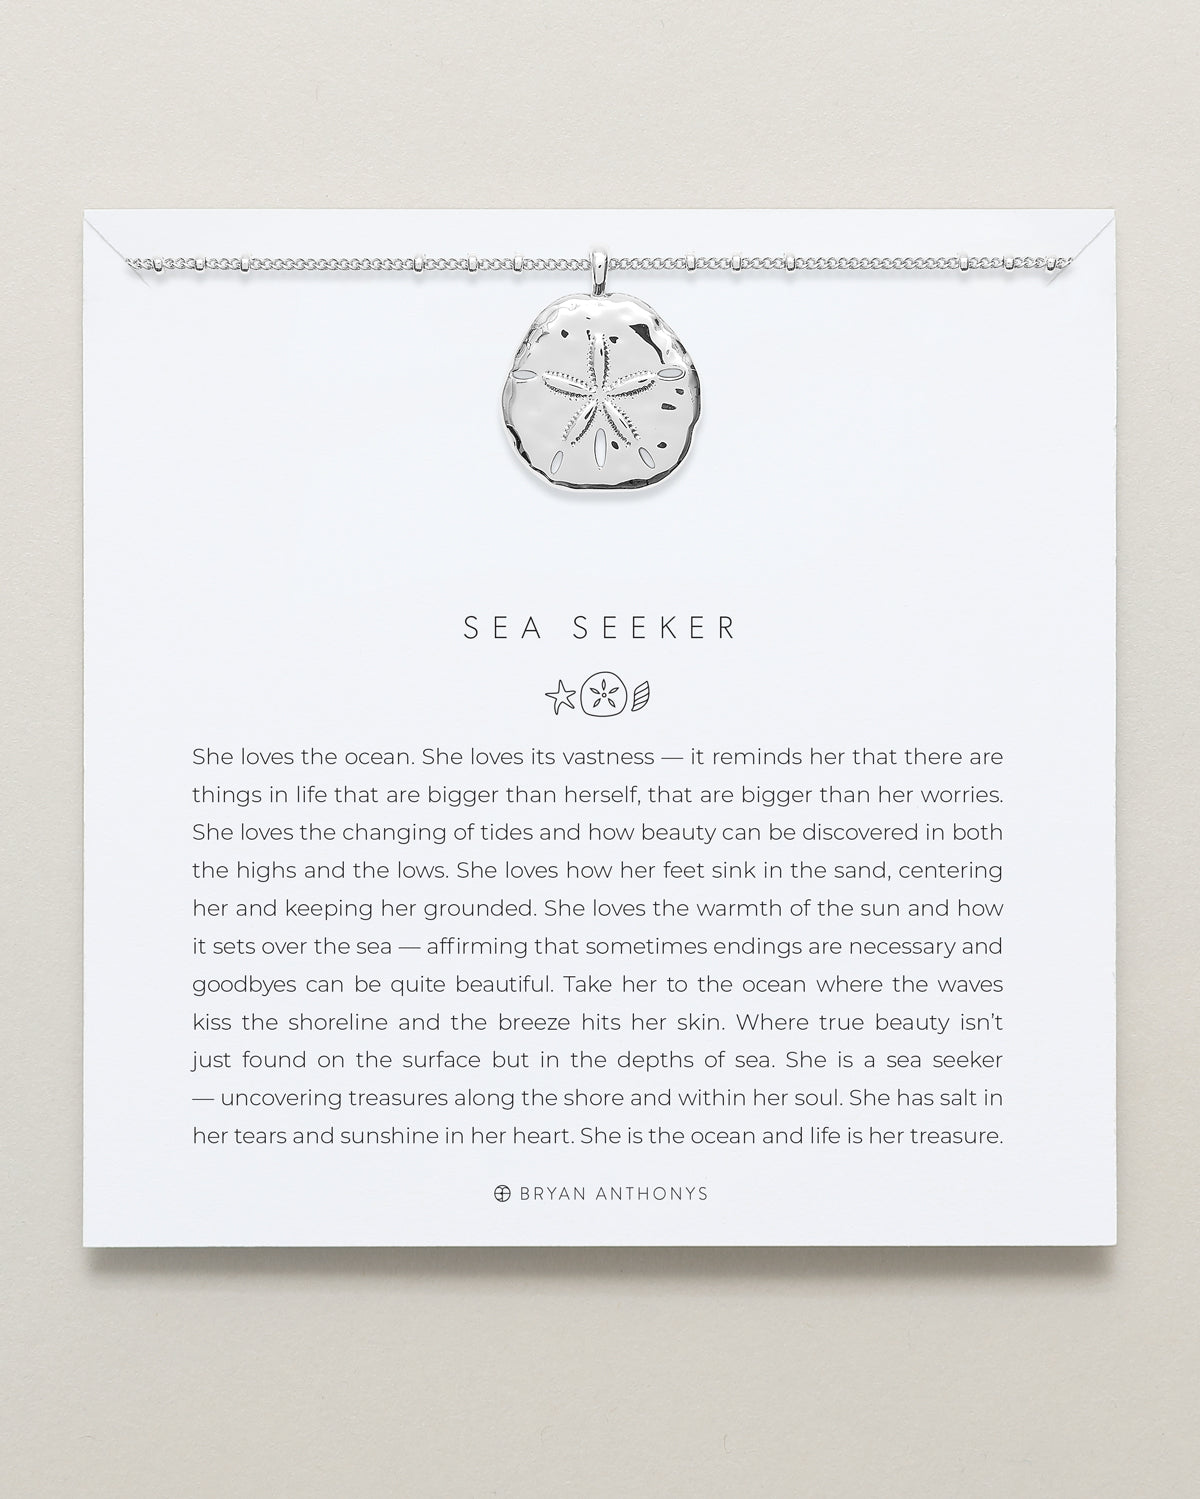 Bryan Anthonys Sea Seeker Silver Pendant Necklace On Card